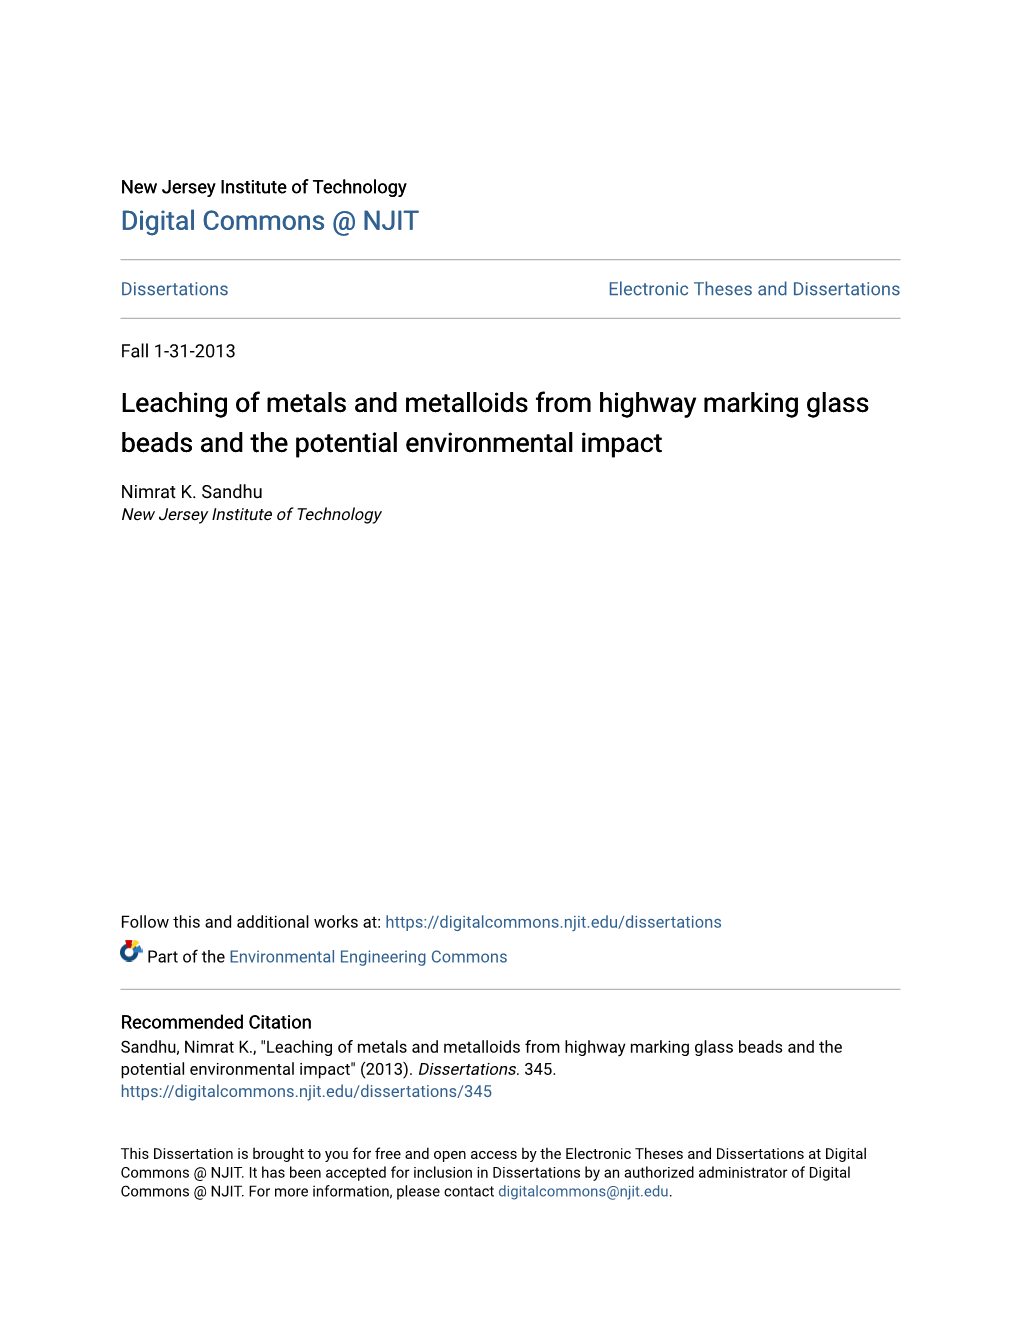 Leaching of Metals and Metalloids from Highway Marking Glass Beads and the Potential Environmental Impact